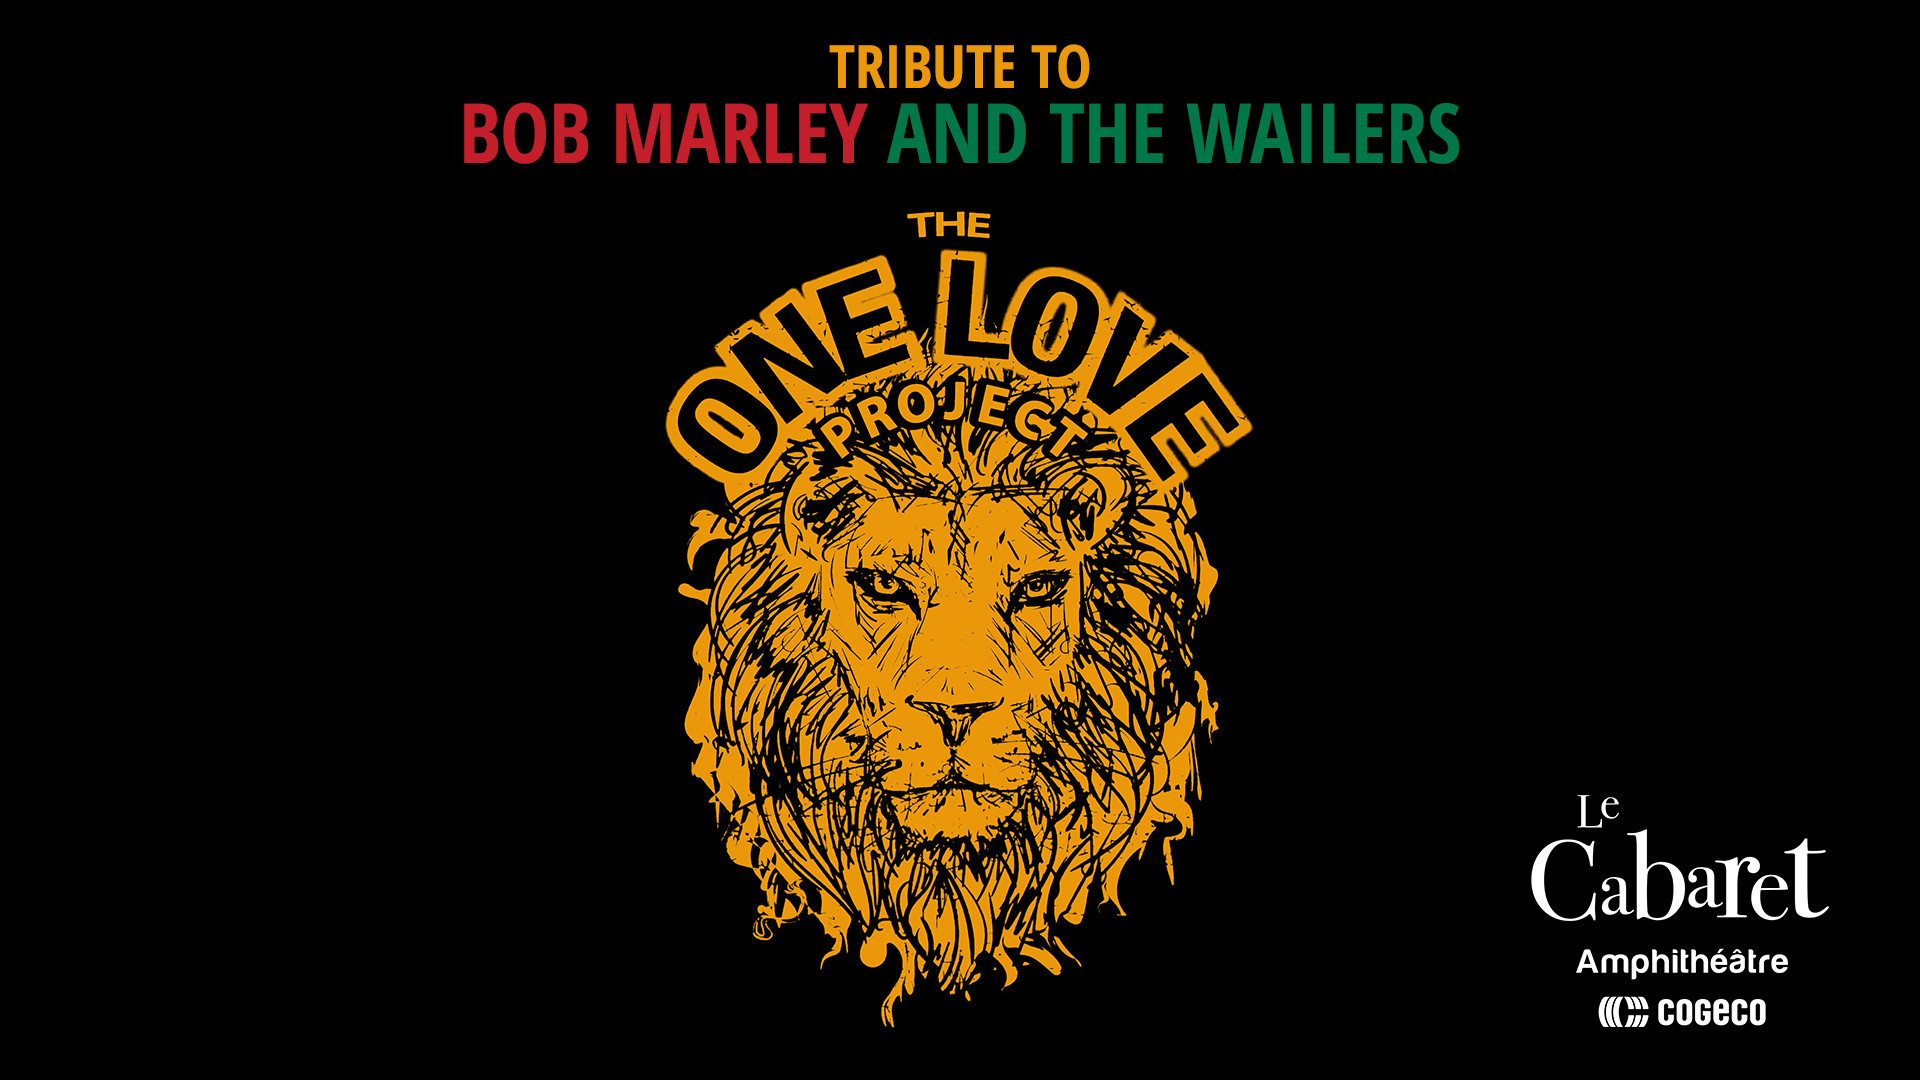 Tribute to Bob Marley and The Wailers